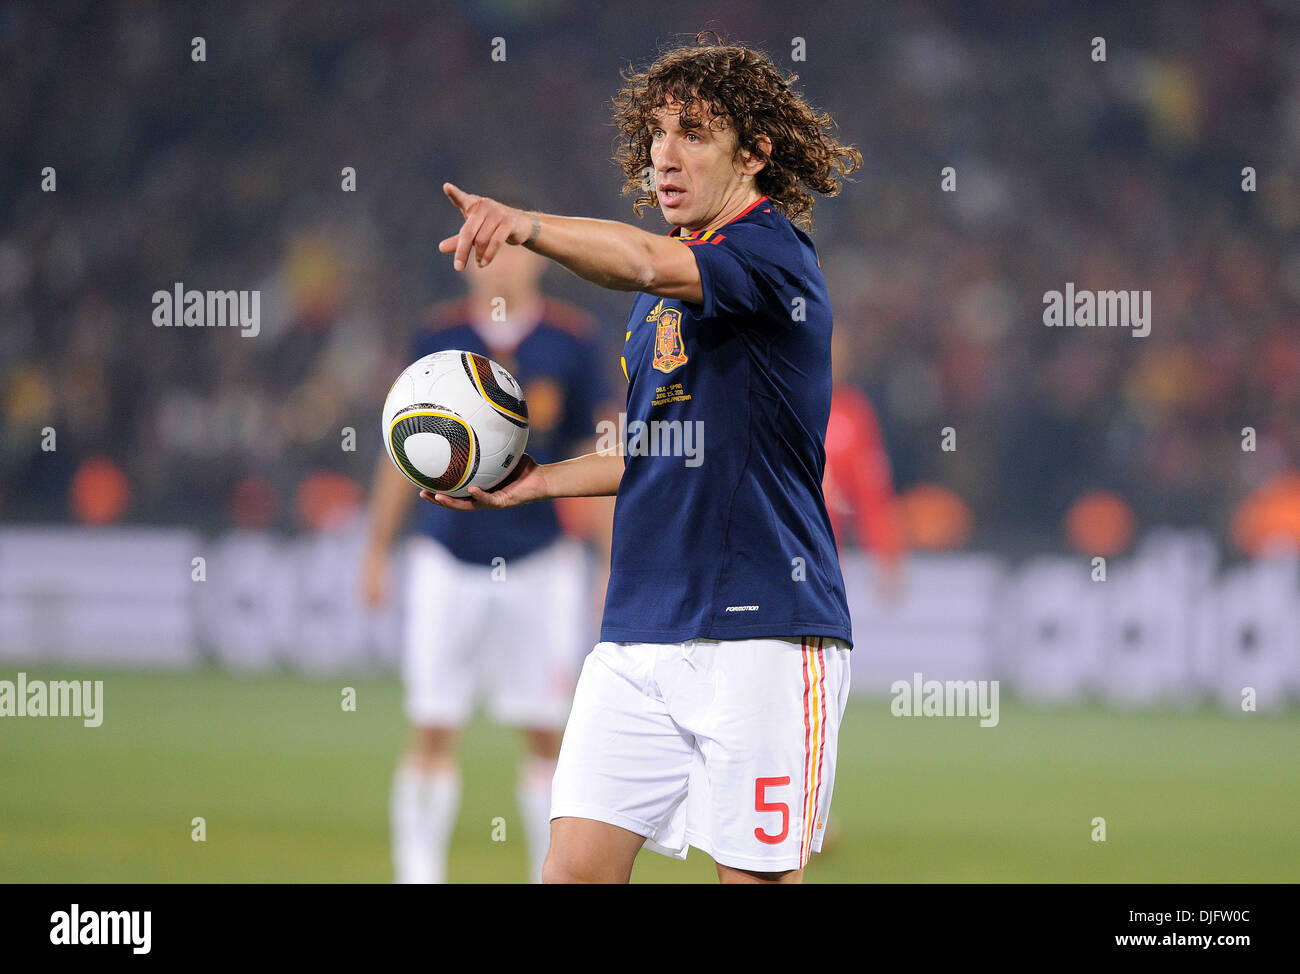 June 25, 2010 - Pretoria, South Africa - Carles Puyol of Spain gestures during the 2010 FIFA World Cup soccer match between Chile and Spain at Loftus Versfeld Stadium on June 25, 2010 in Pretoria, South Africa. (Credit Image: © Luca Ghidoni/ZUMApress.com) Stock Photo